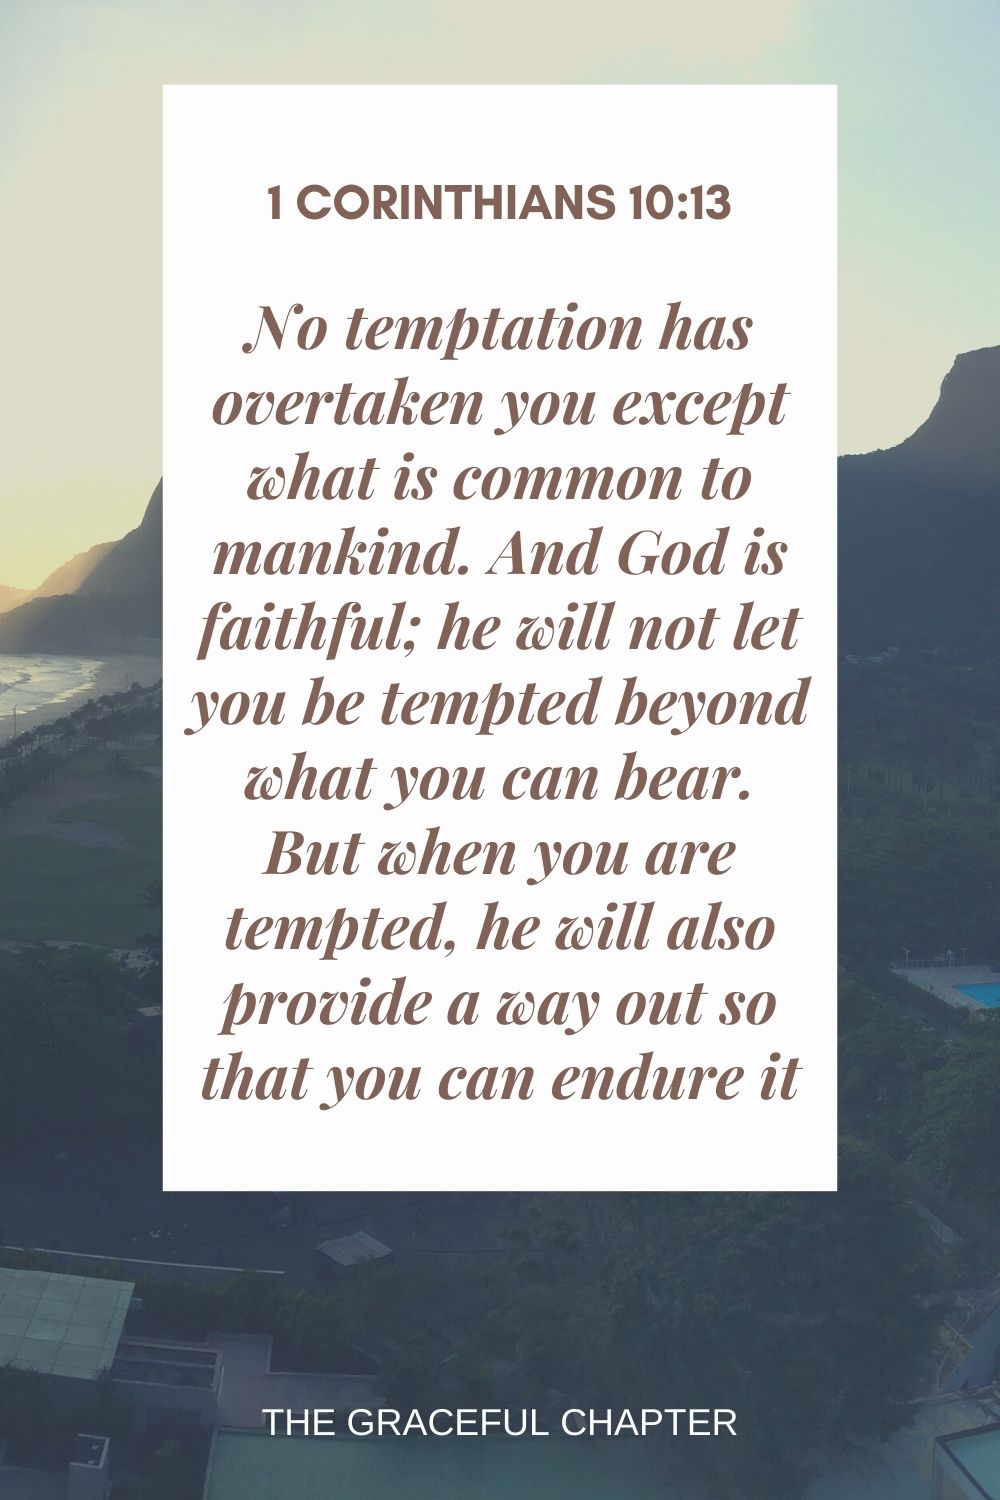 No temptation has overtaken you except what is common to mankind. And God is faithful; he will not let you be tempted  beyond what you can bear. But when you are tempted, he will also provide a way out so that you can endure it. 1 Corinthians 10:13